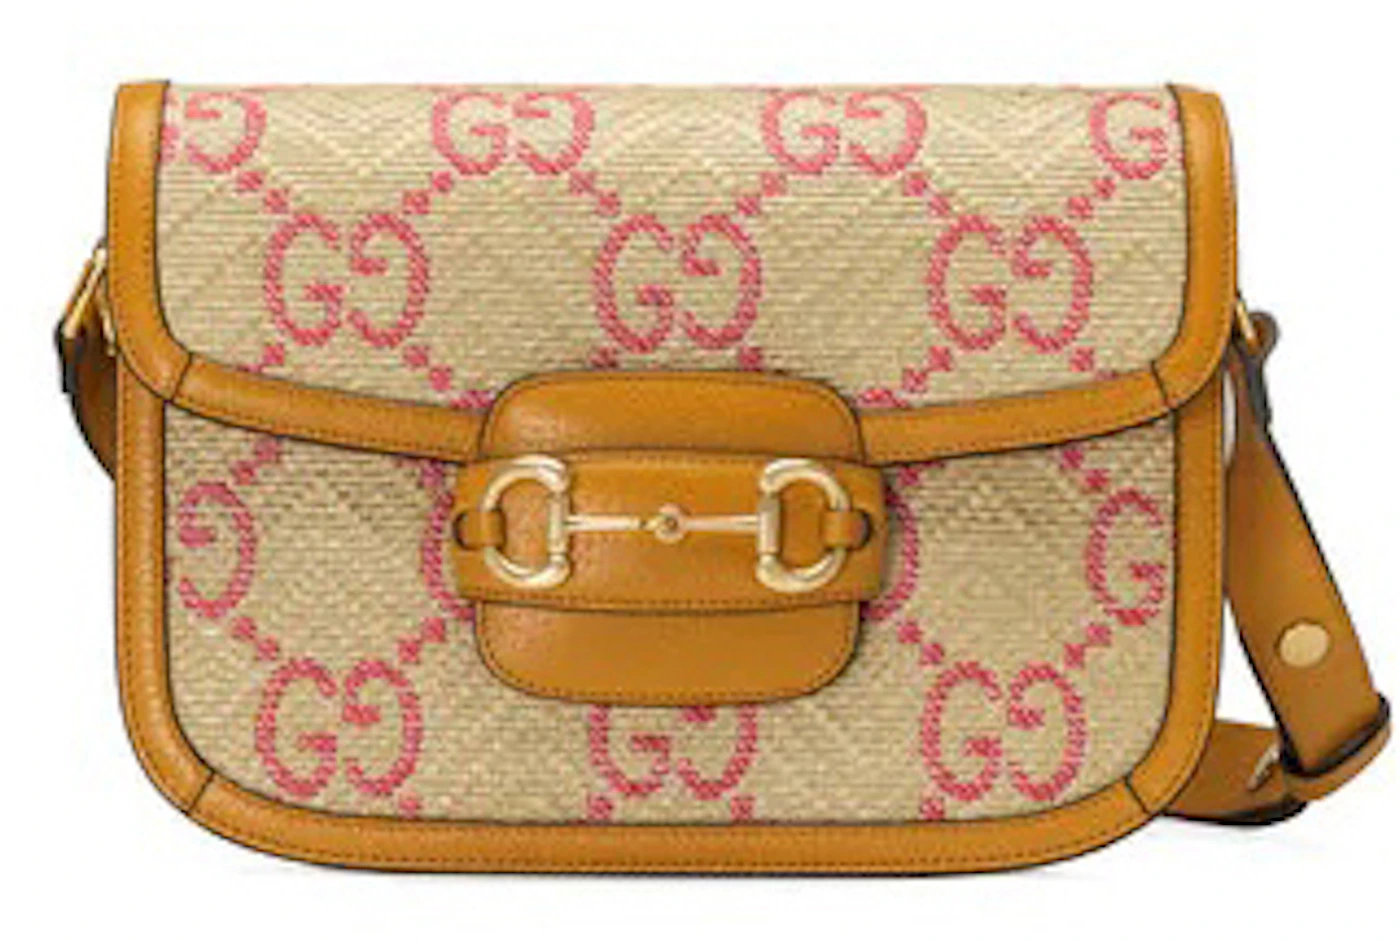 Authenticated Used Gucci GUCCI Horsebit 1955 days limited GG shoulder bag  beige leather web stripe strap?658574 18YSJ 9696 